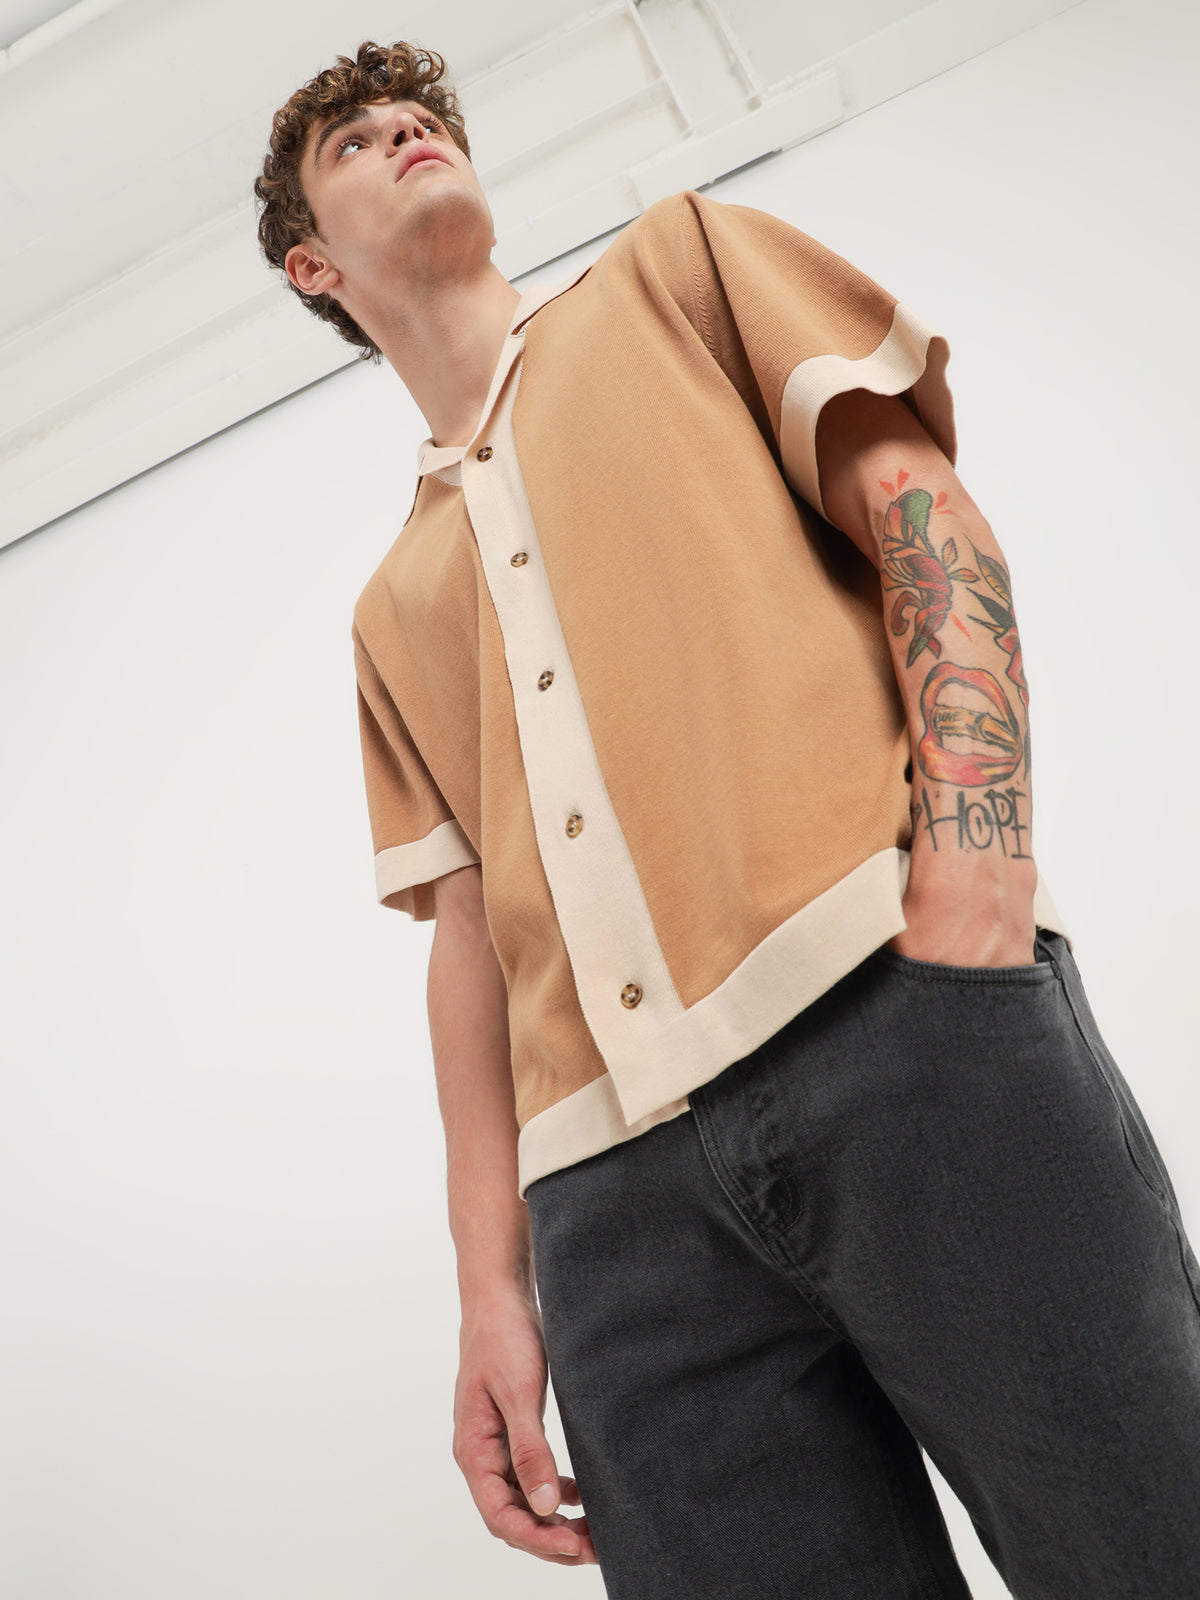 Sully Knit Shirt in Camel